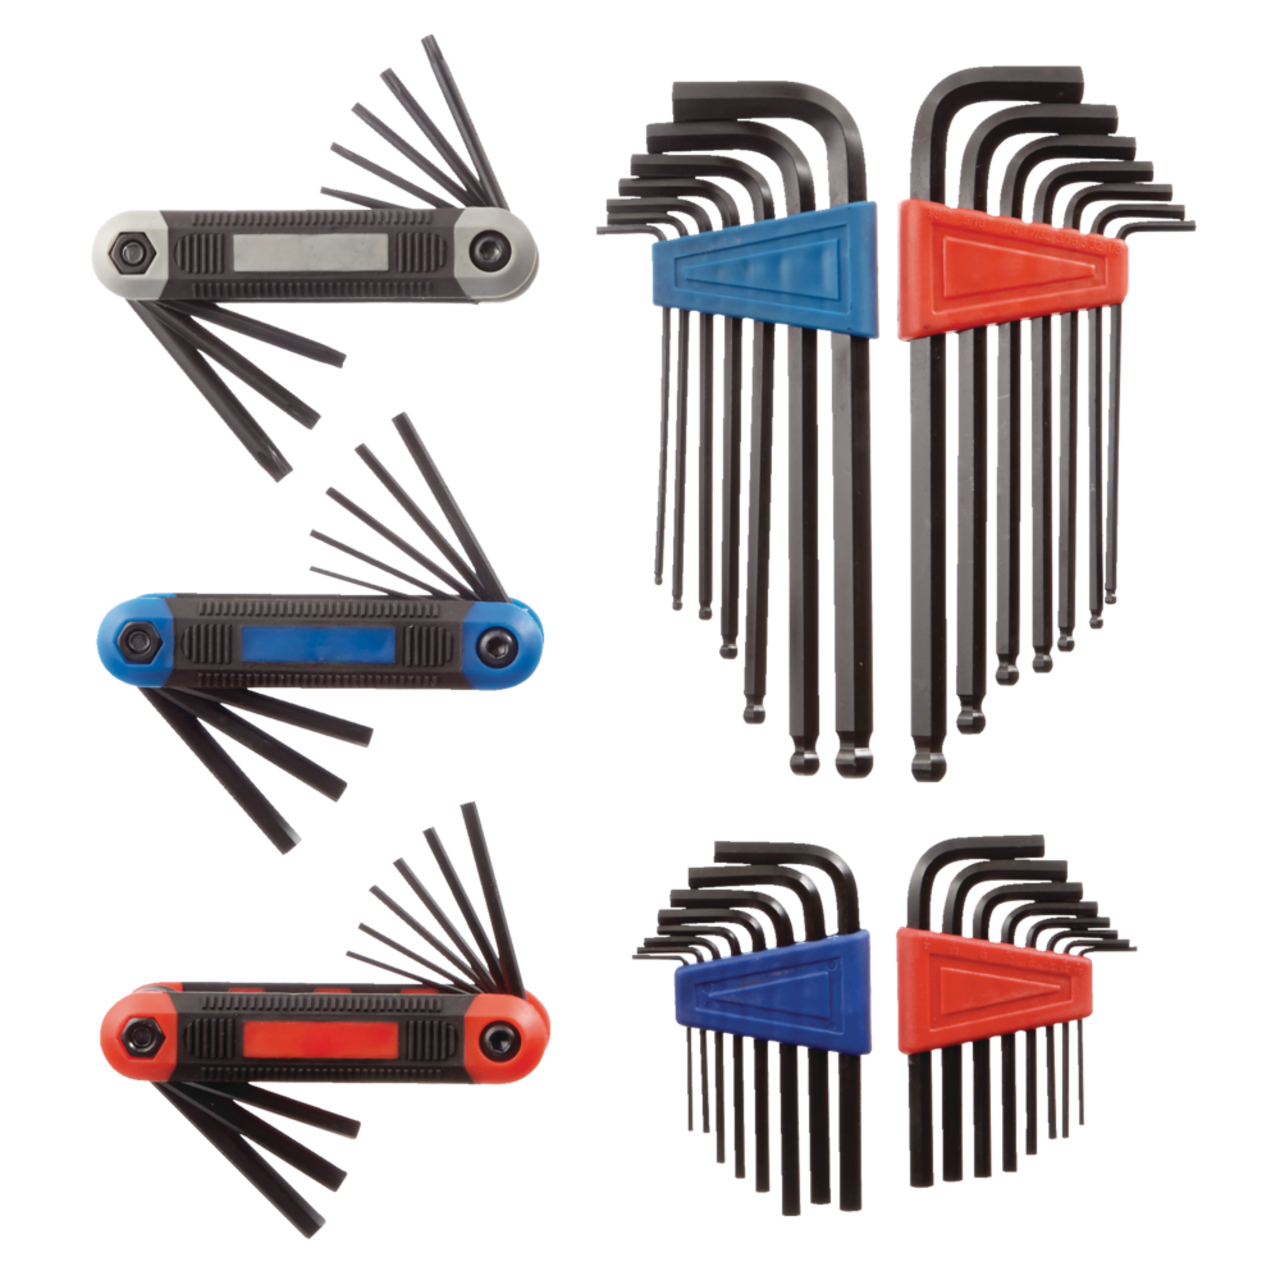 https://media-www.canadiantire.ca/product/fixing/tools/metal-working/0588809/certified-55-piece-hex-key-set-902a83a4-8393-44aa-87d4-fd0cf6ae277e.png?imdensity=1&imwidth=640&impolicy=mZoom